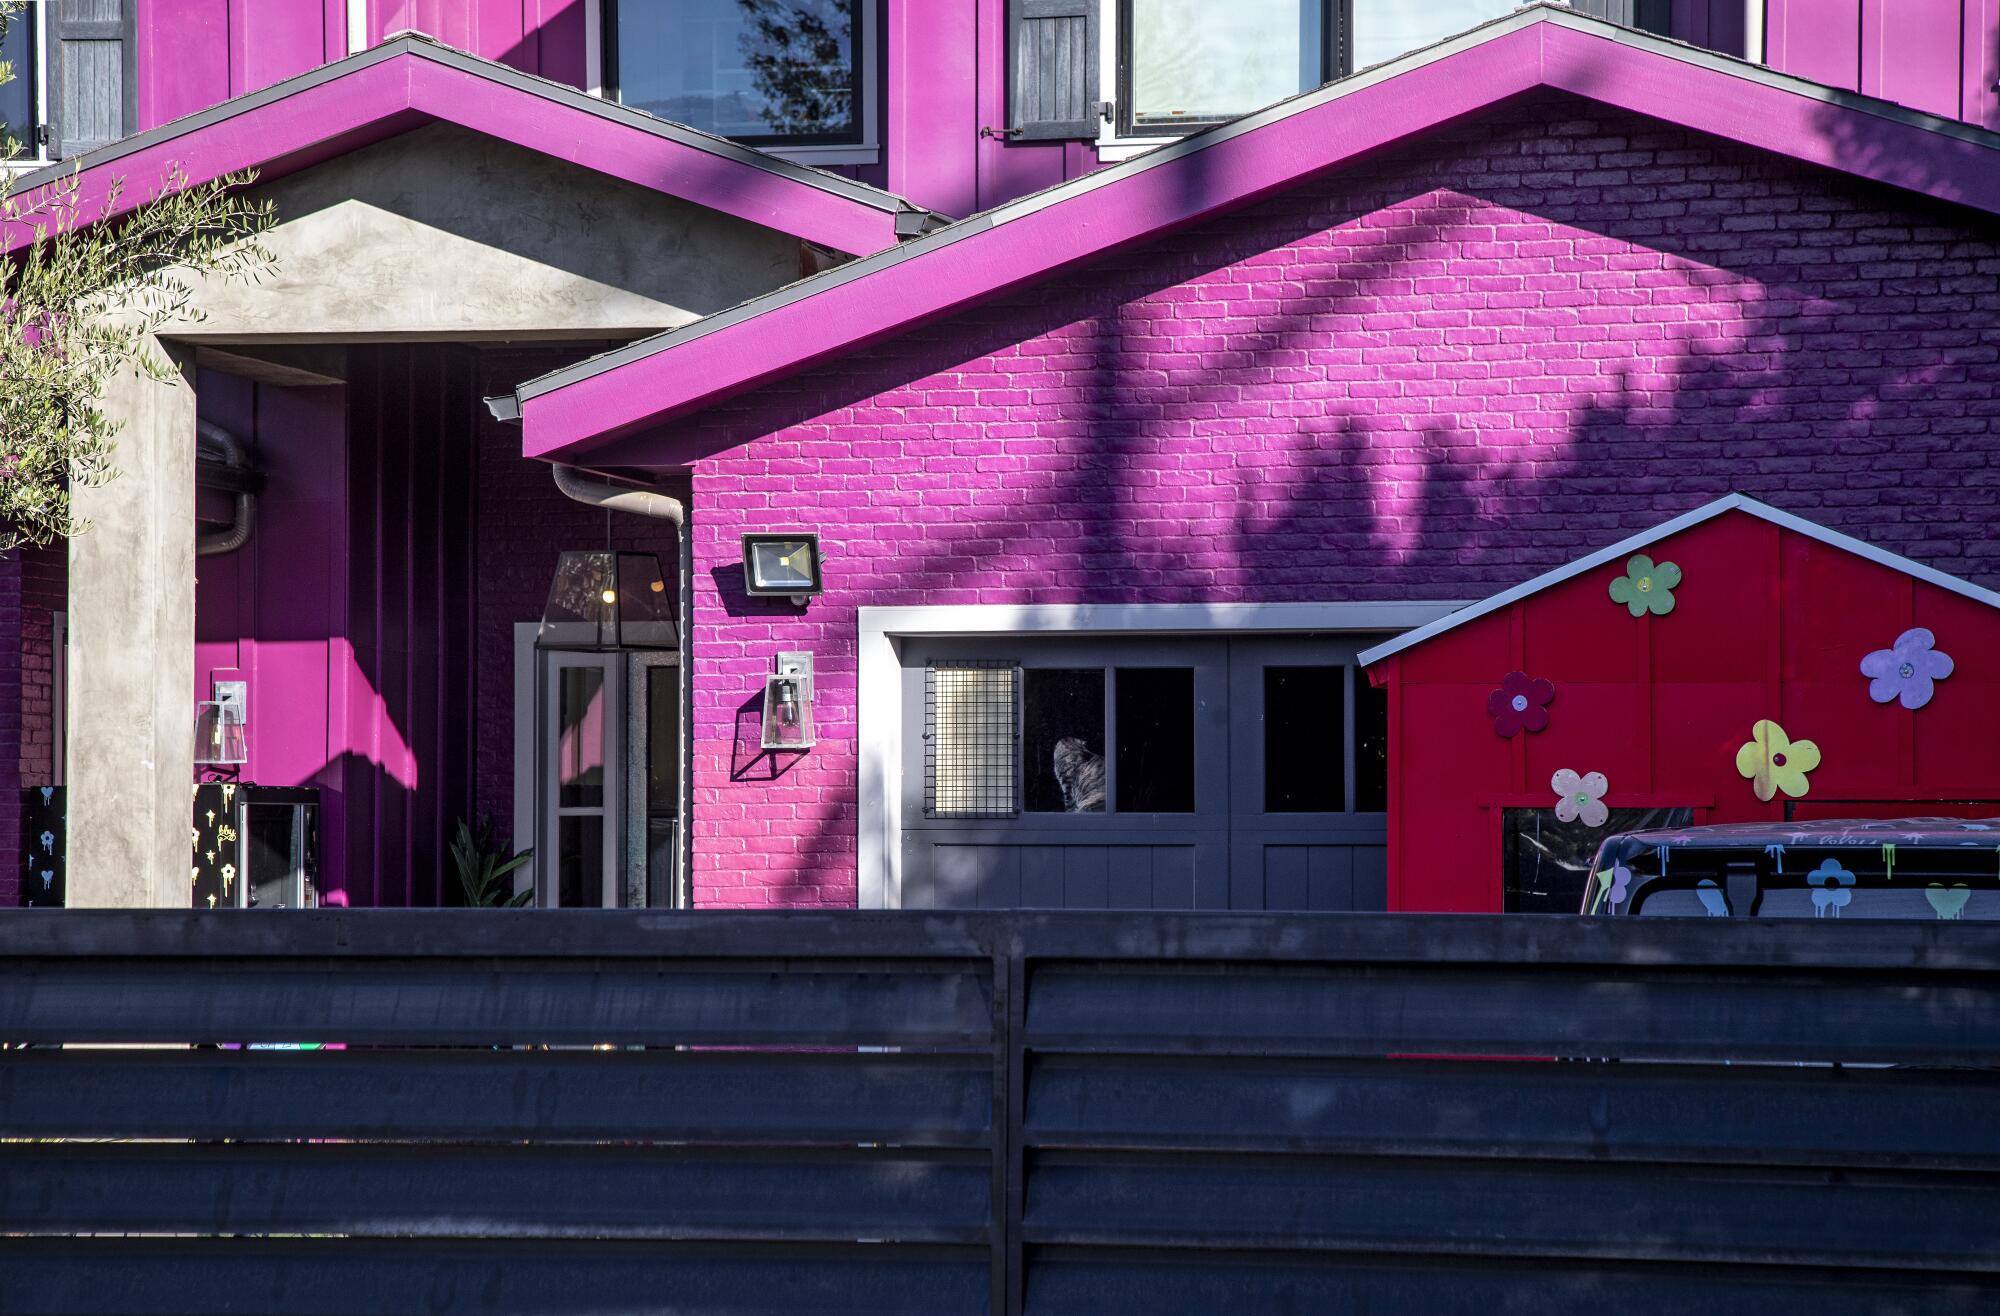 The exterior of Piper Rockelle's fuchsia-painted house.